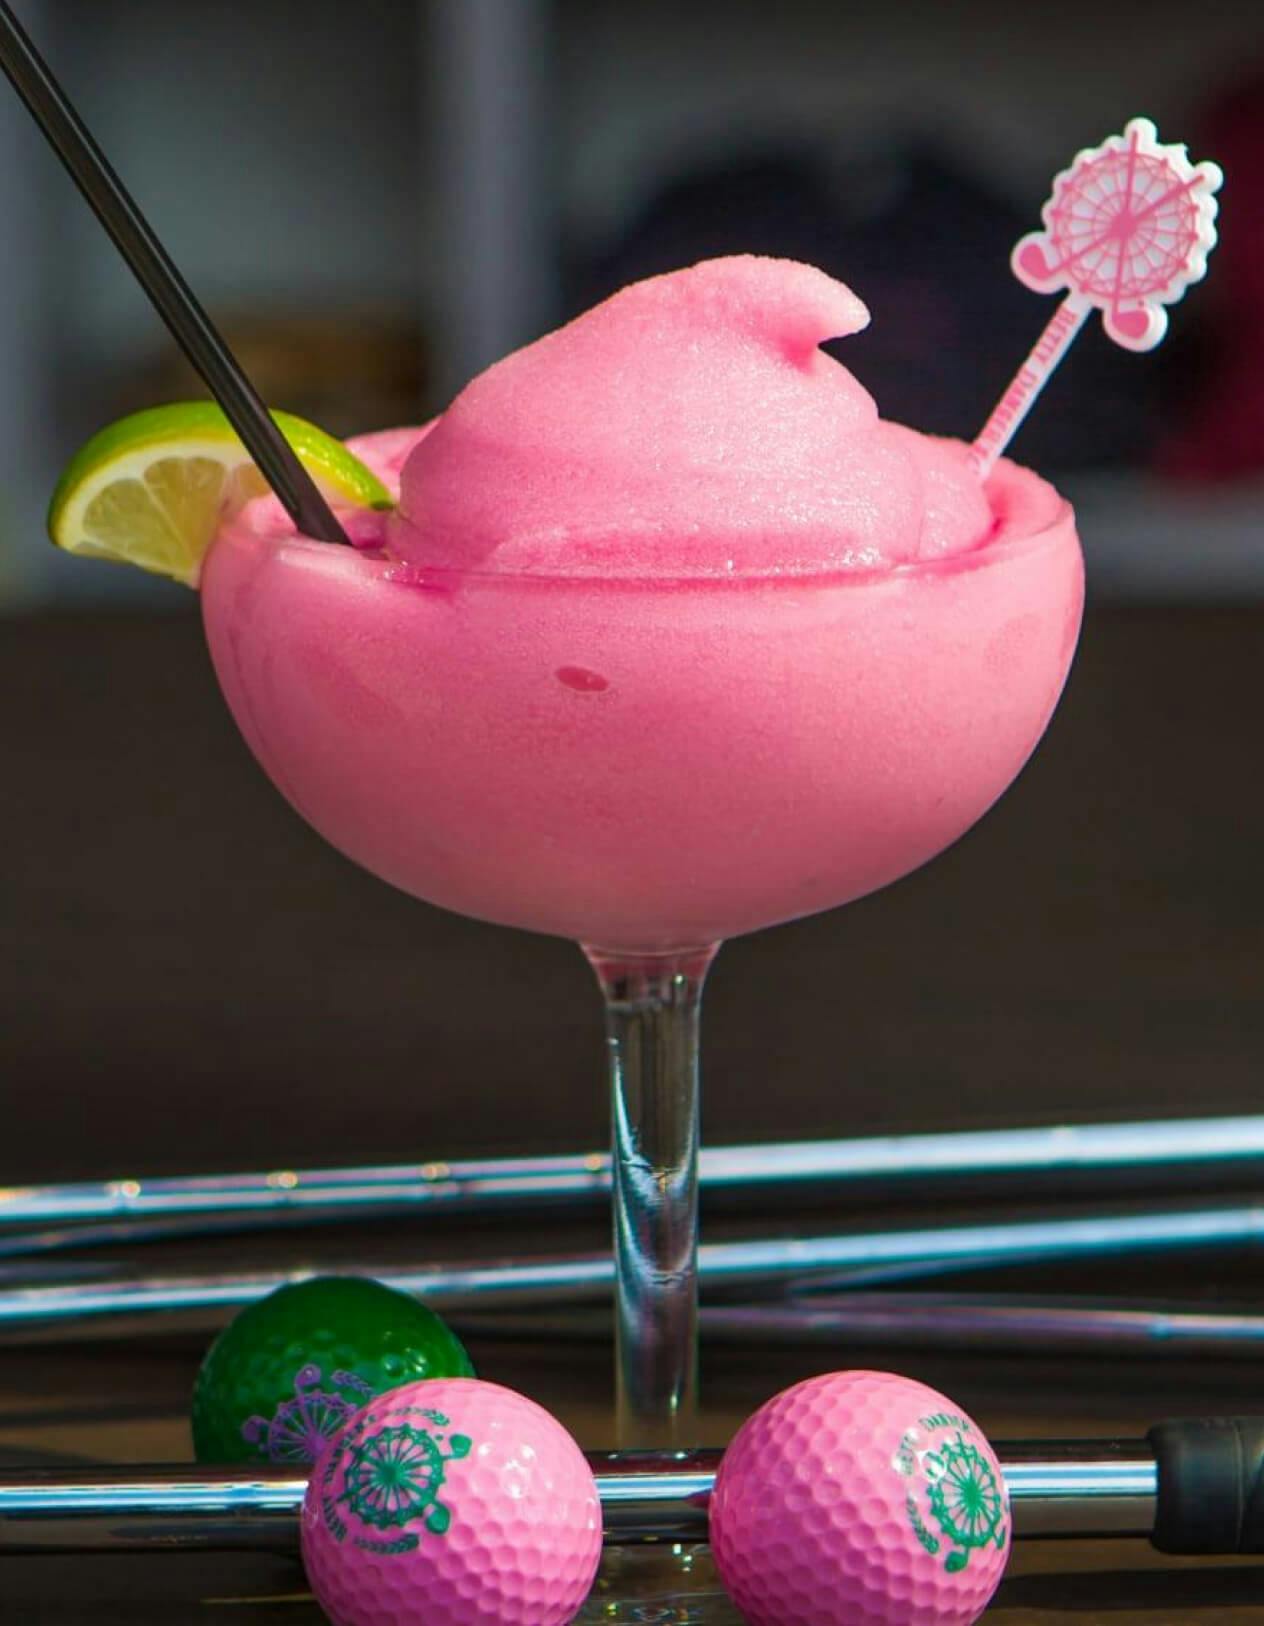 A coup with a pink slushy drink within it garnished with a lime. In front of the drink are two pink golf balls and to the left, there is one green golf ball. Layered across the table the drink is on are multiple golf clubs.